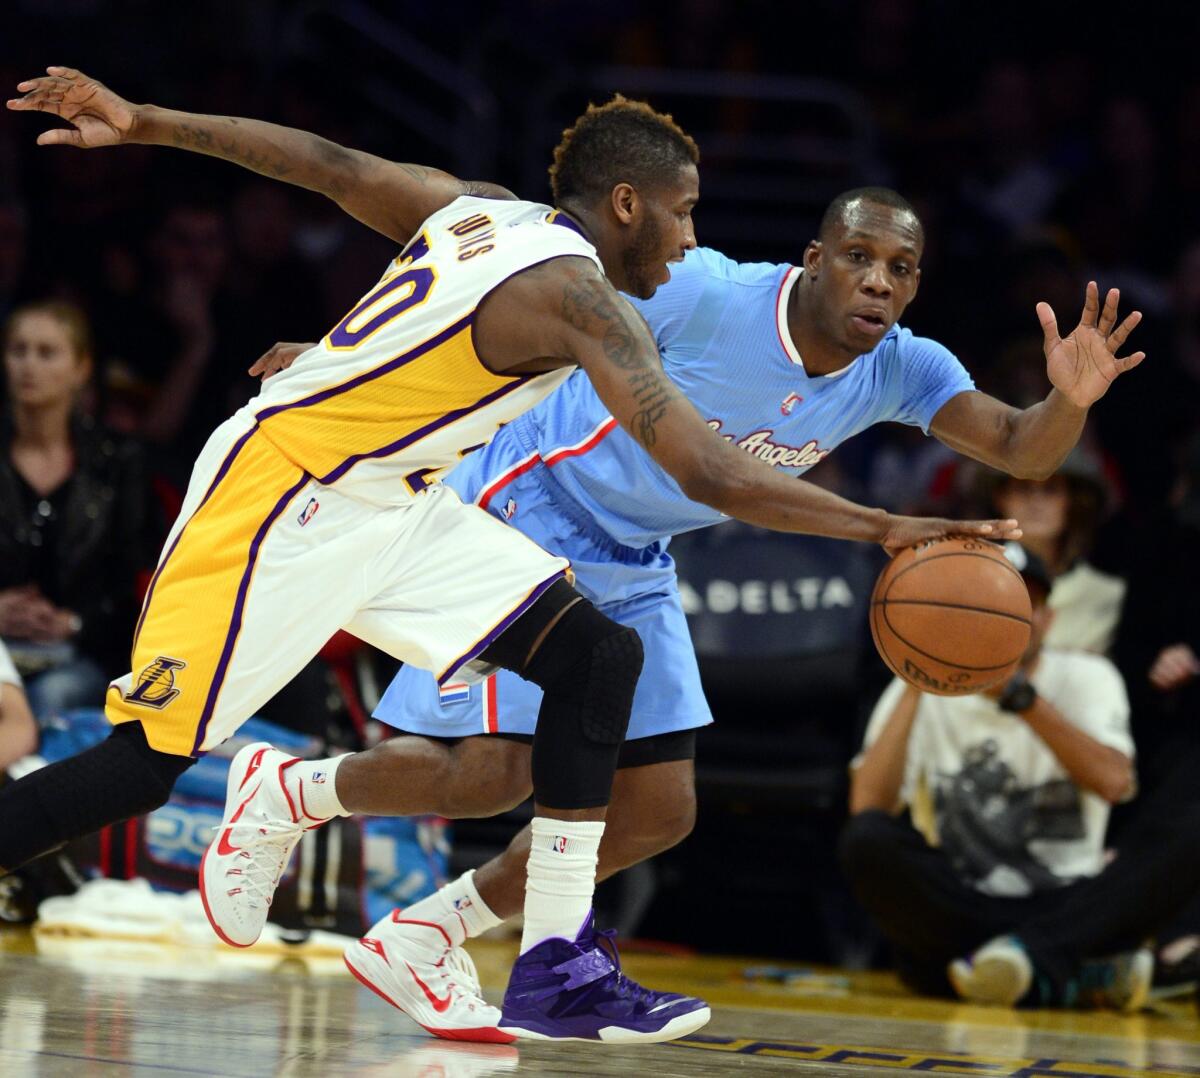 Clippers guard Lester Hudson, right, defends against Lakers guard Dwight Buycks on April 5.